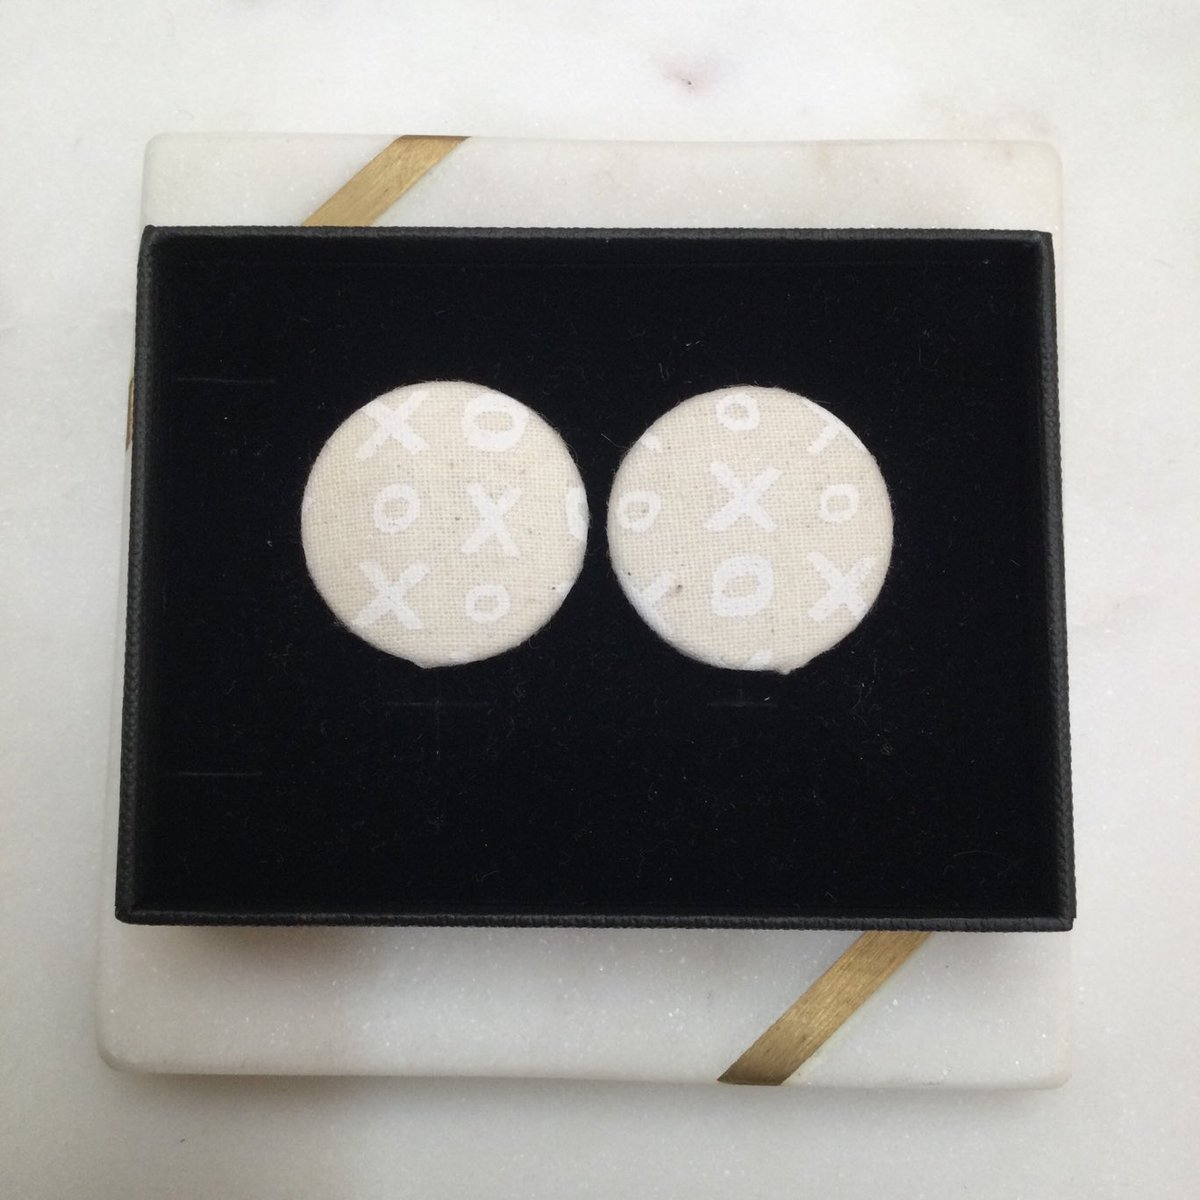 Excited to share this item from my #etsy shop: Naughts and Crosses Fabric Button Stud Earrings 23mm 27mm - Beige Earrings - Button Earrings - Fabric Earrings - Rockabilly - Retro etsy.me/3RQ2JeV
#earrings #studearrings #buttonearrings #fabricstuds #xo